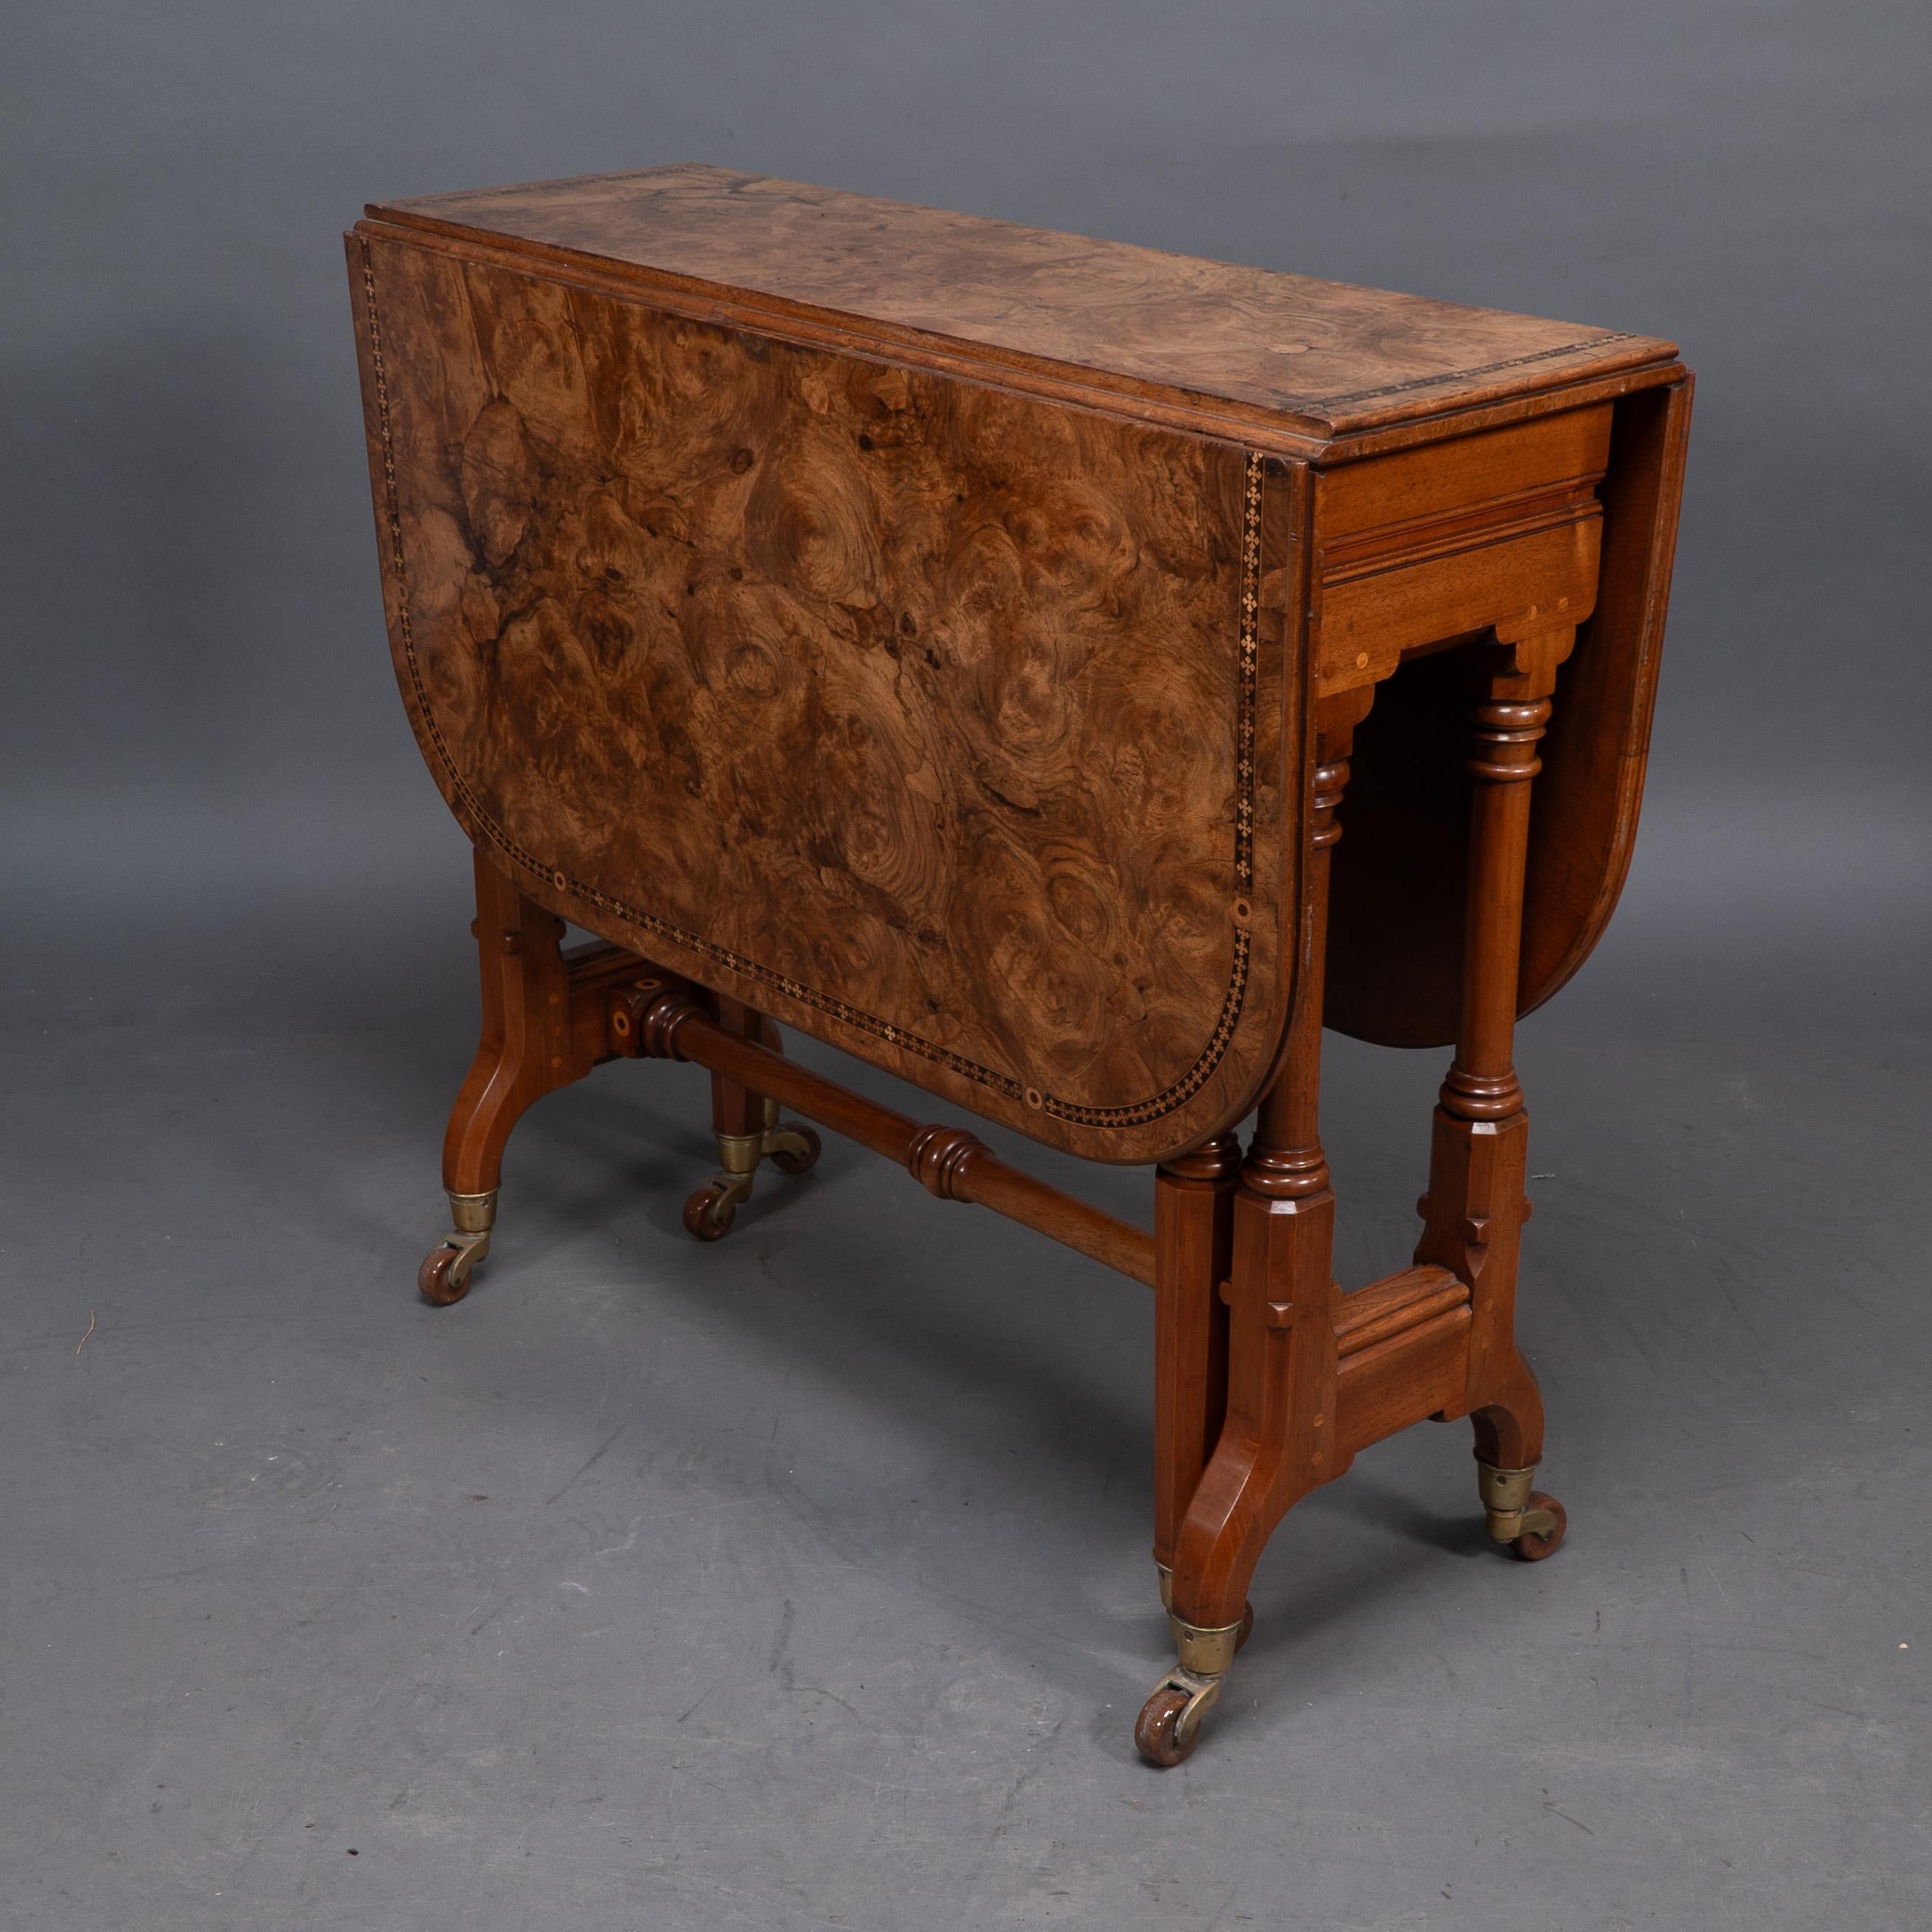 English Charles Bevan for Marsh & Jones. A Gothic Revival burr walnut Sutherland table For Sale